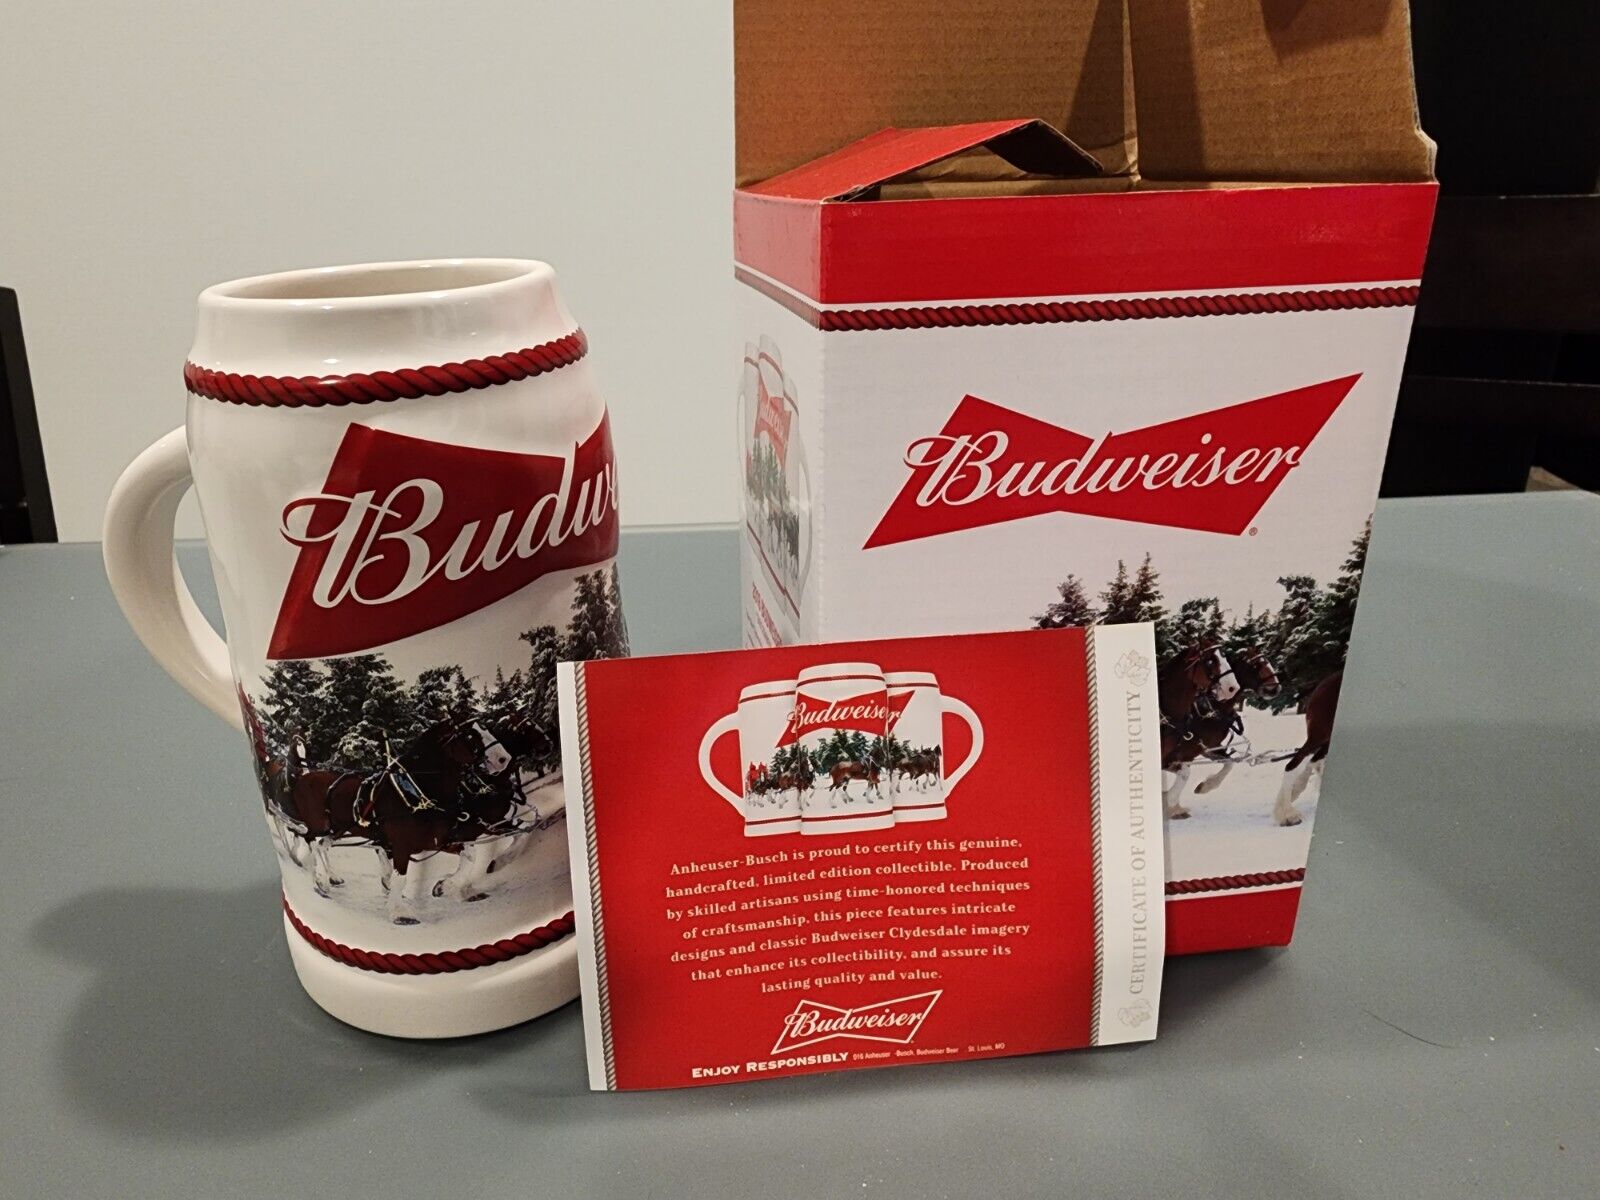 2016 Budweiser Anheuser Busch Beer Stein Mug Christmas Holiday new and boxed